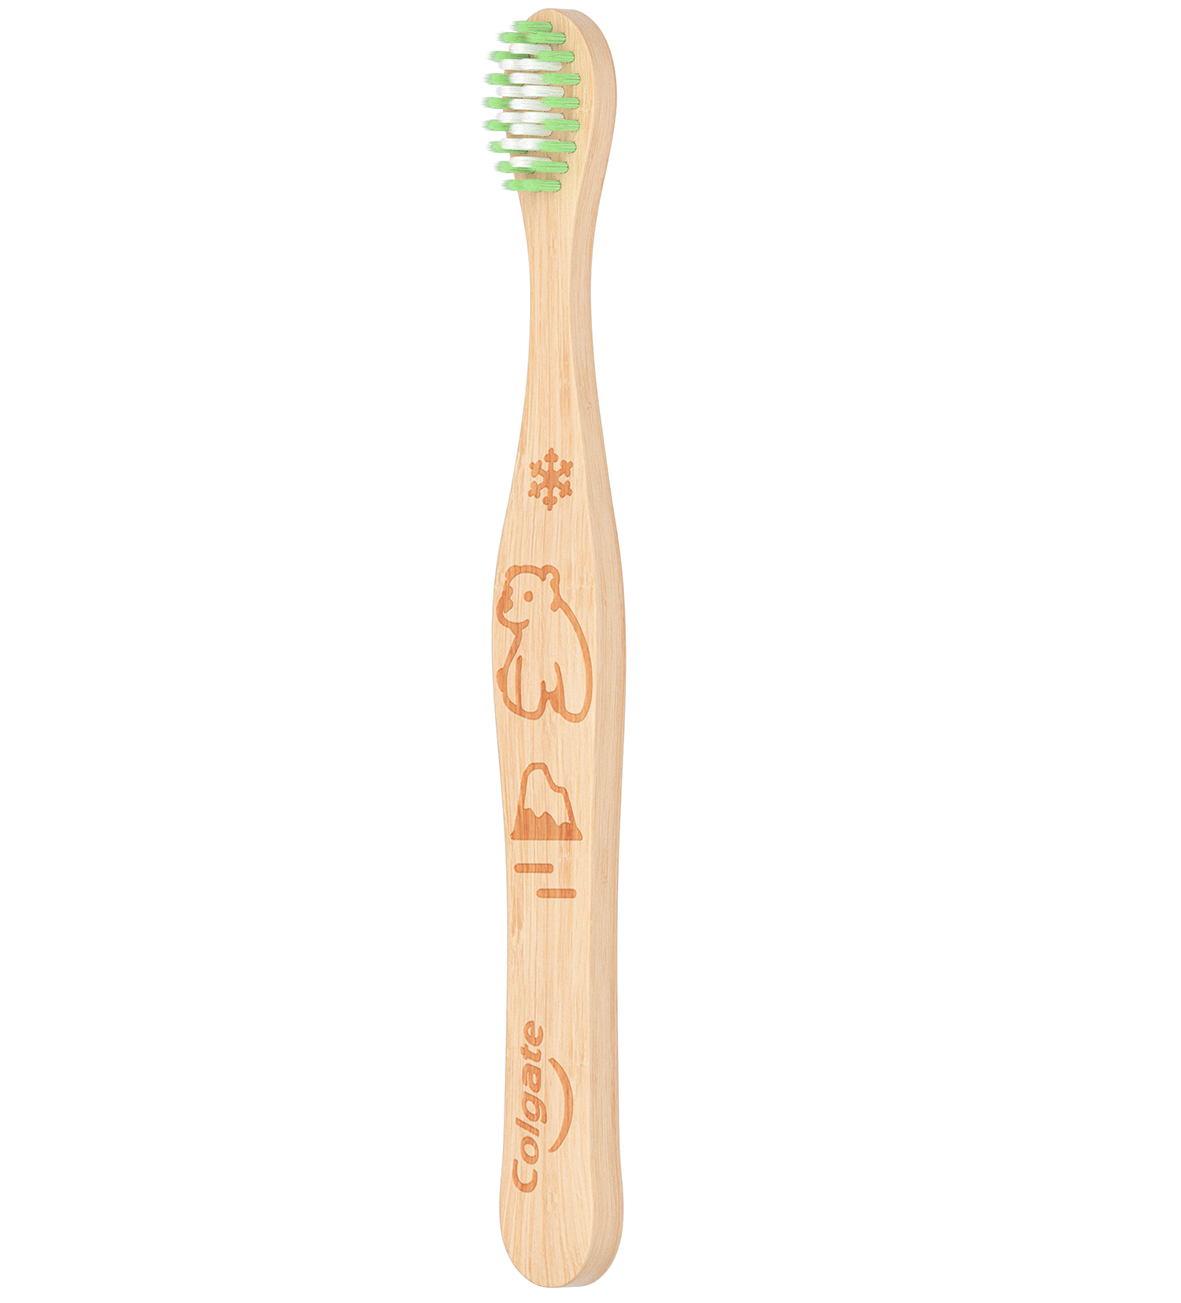 Colgate has brought out a bamboo brush for children